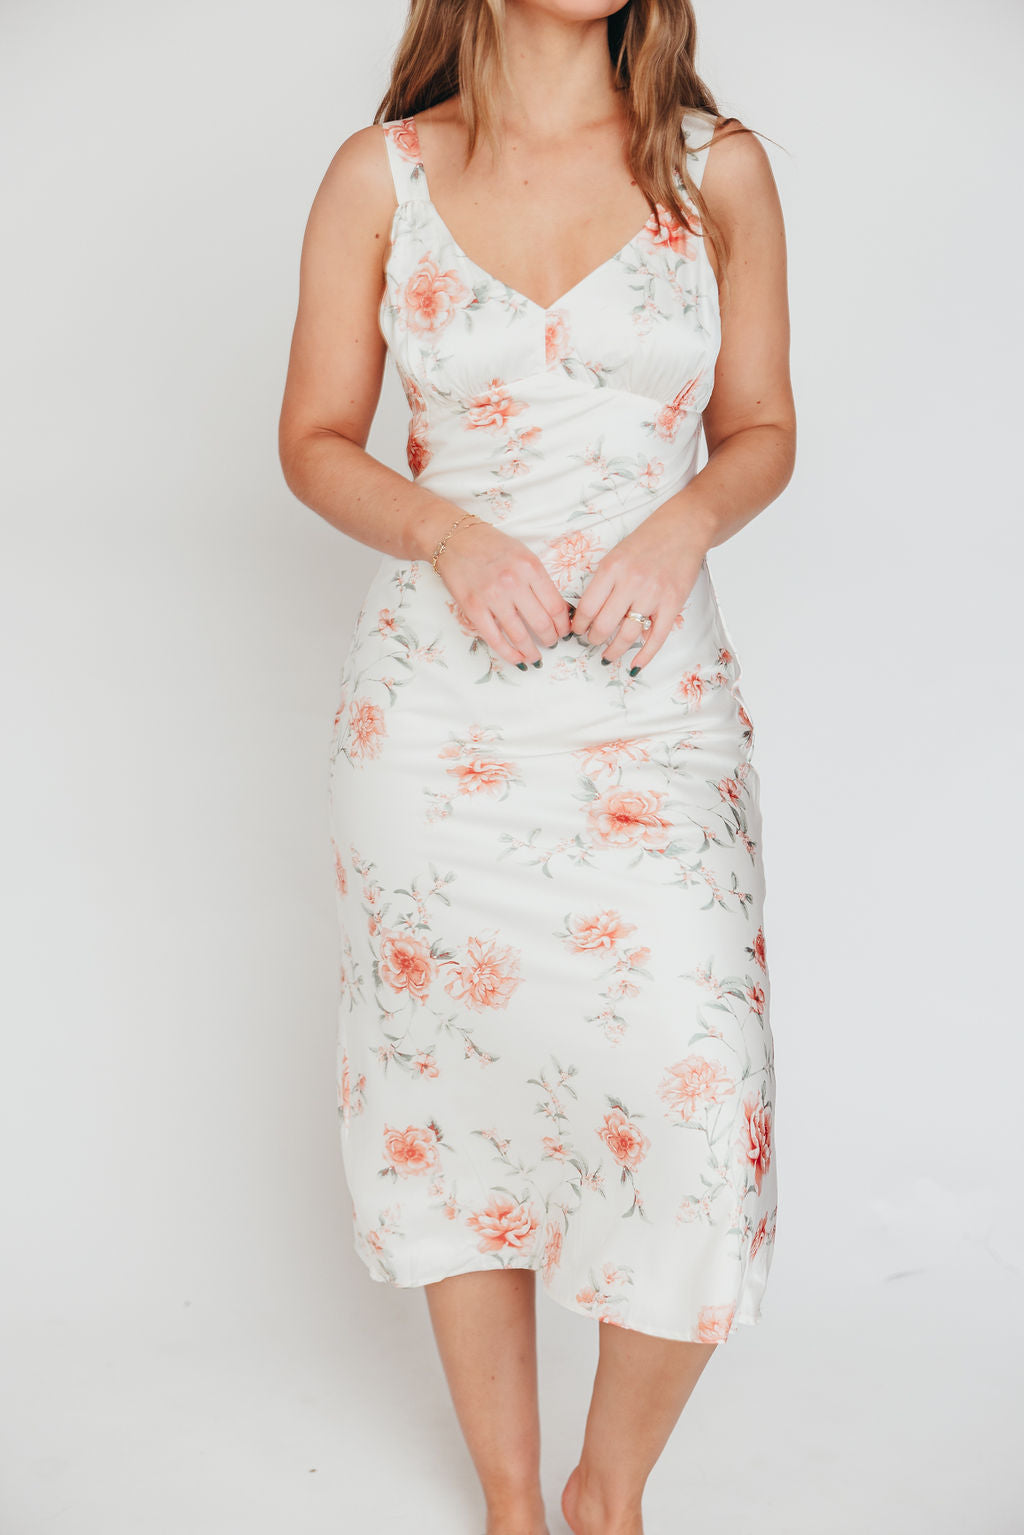 The Felicity Midi Dress in Ivory Floral